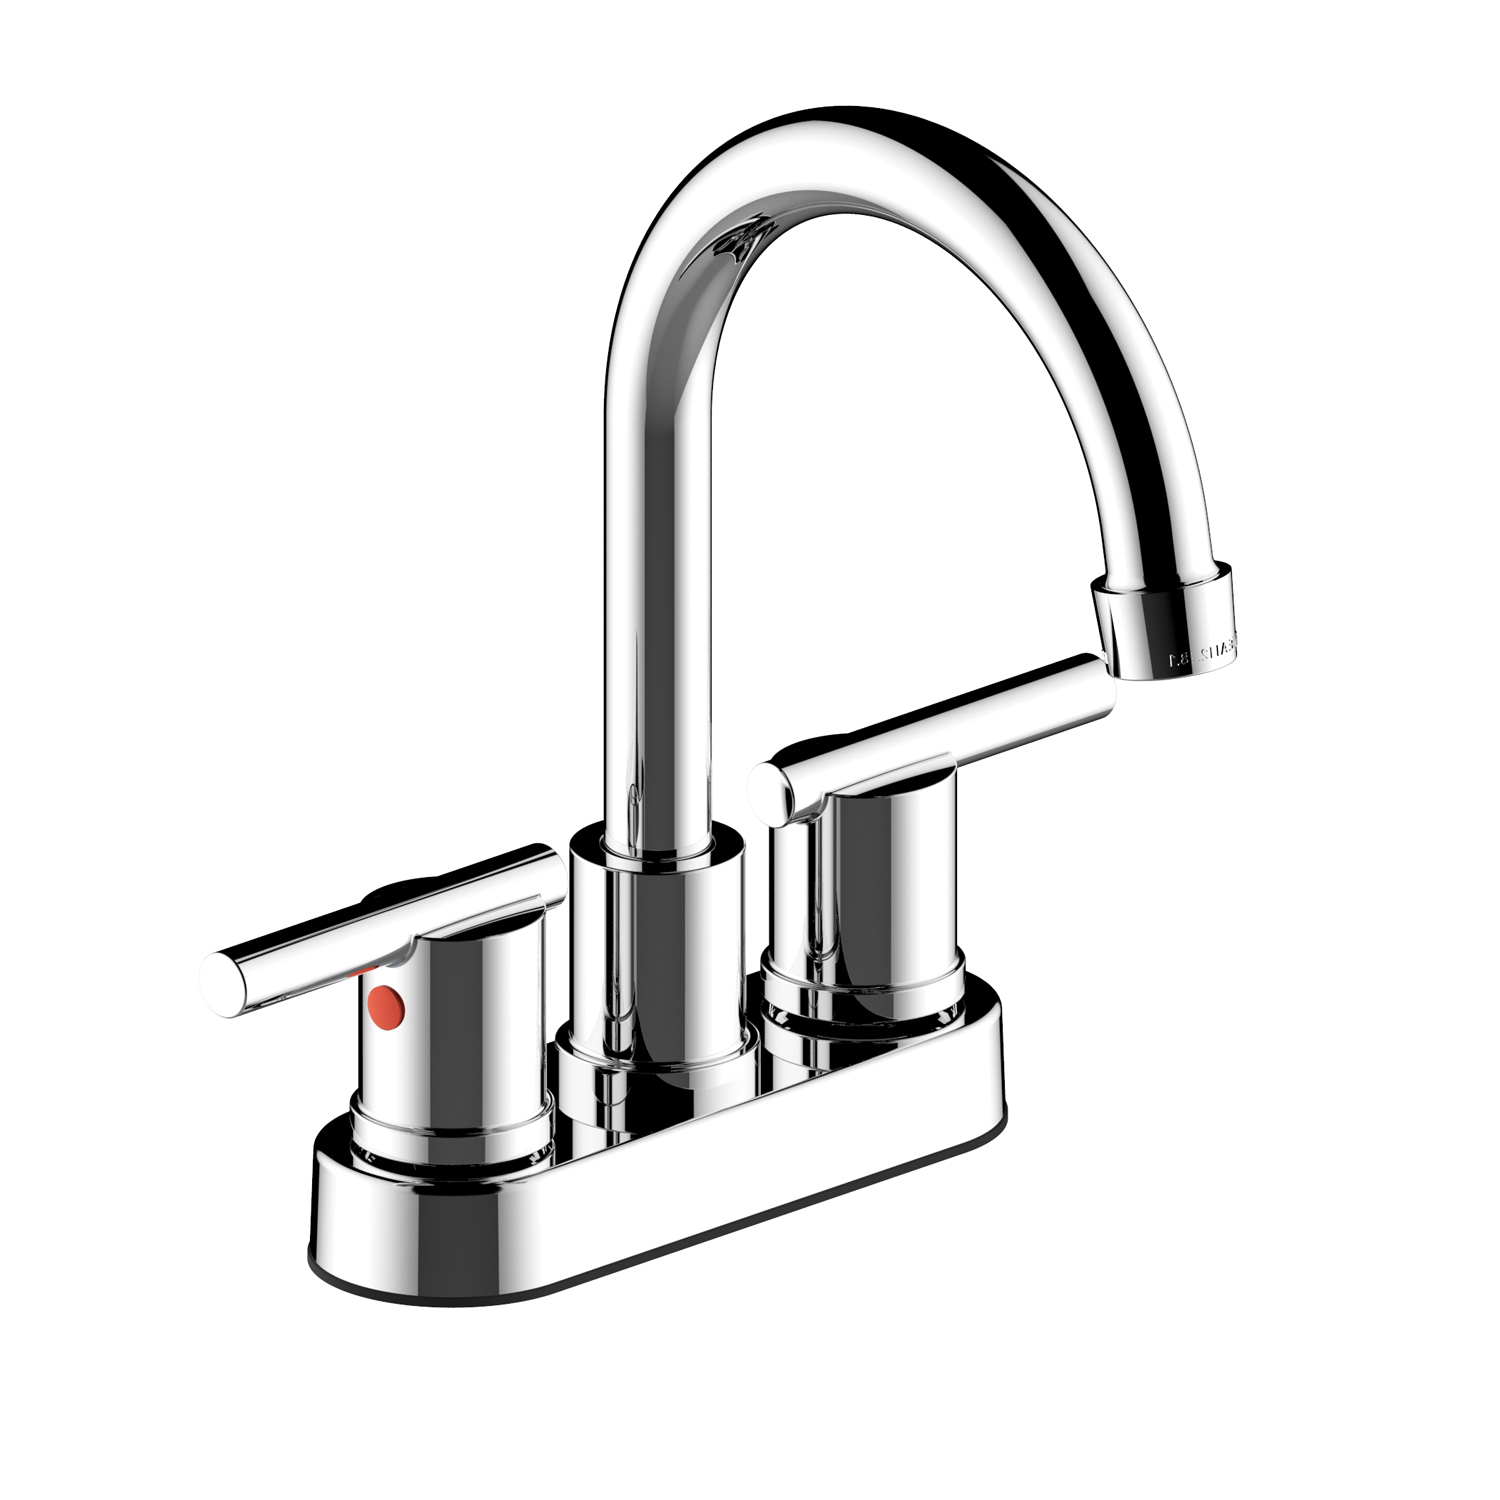 06-3332p northernlights faucet web 0